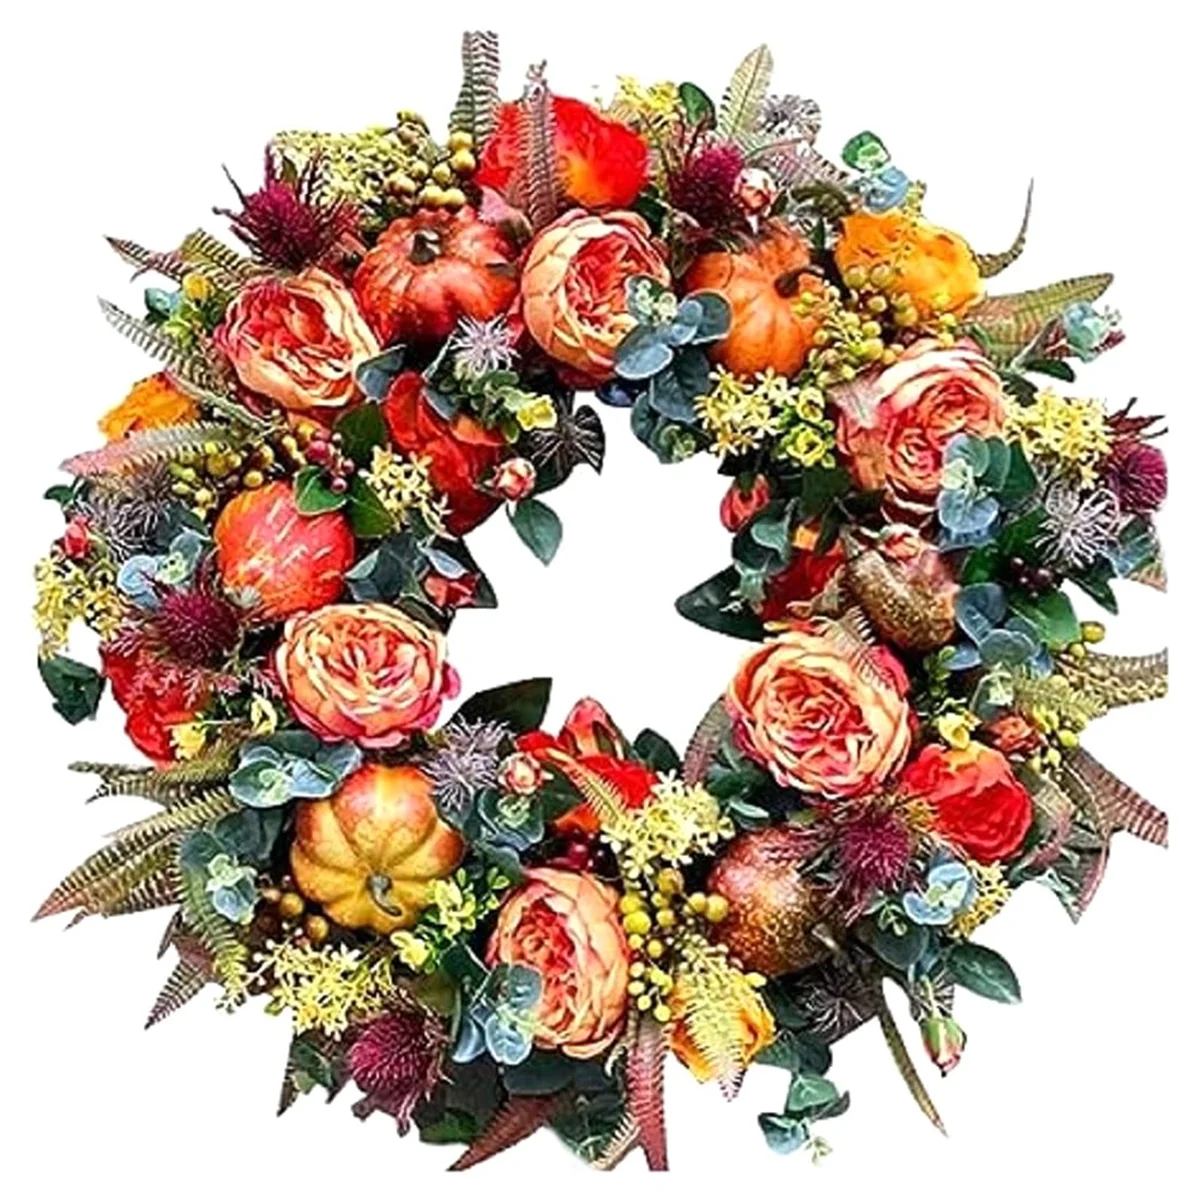 

Fall and Pumpkin Wreath Year Round, Durable Autumn Wreath with Maple Leaf Berry, Farmhouse Wreath for Front Door